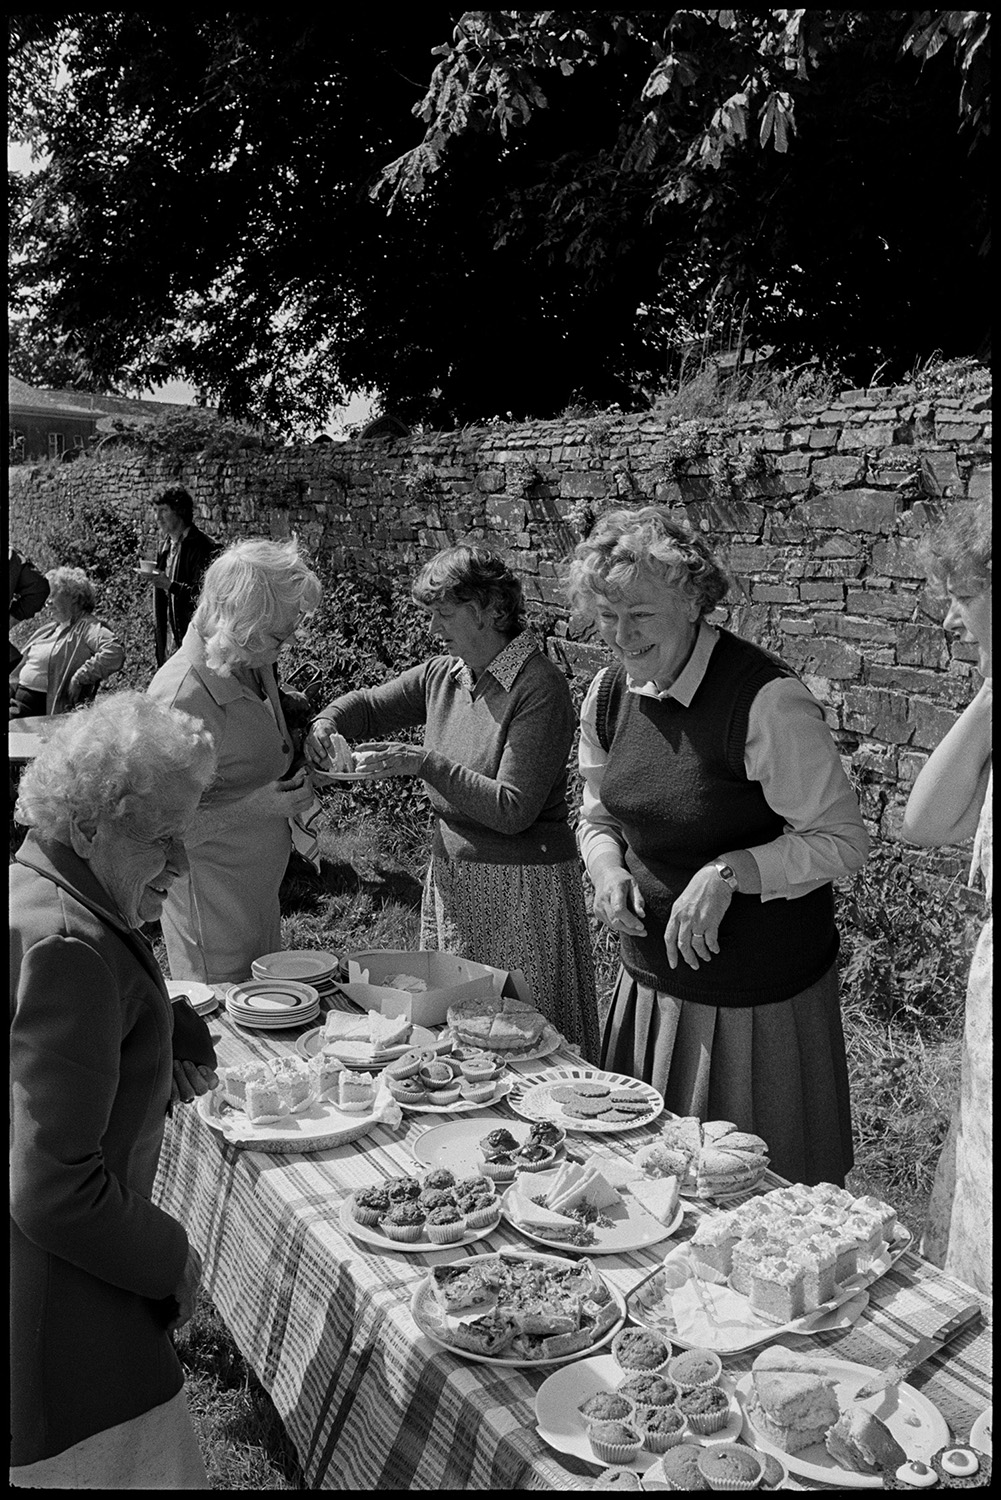 Village revel, fete, folk dance on green, stalls, jumble, guess weight of the Ram, fancy dress.
[Women serving refreshments at Beaford Revel on the village green. The table is laid with plates of cakes, buns and sandwiches. The churchyard wall is visible behind them.]